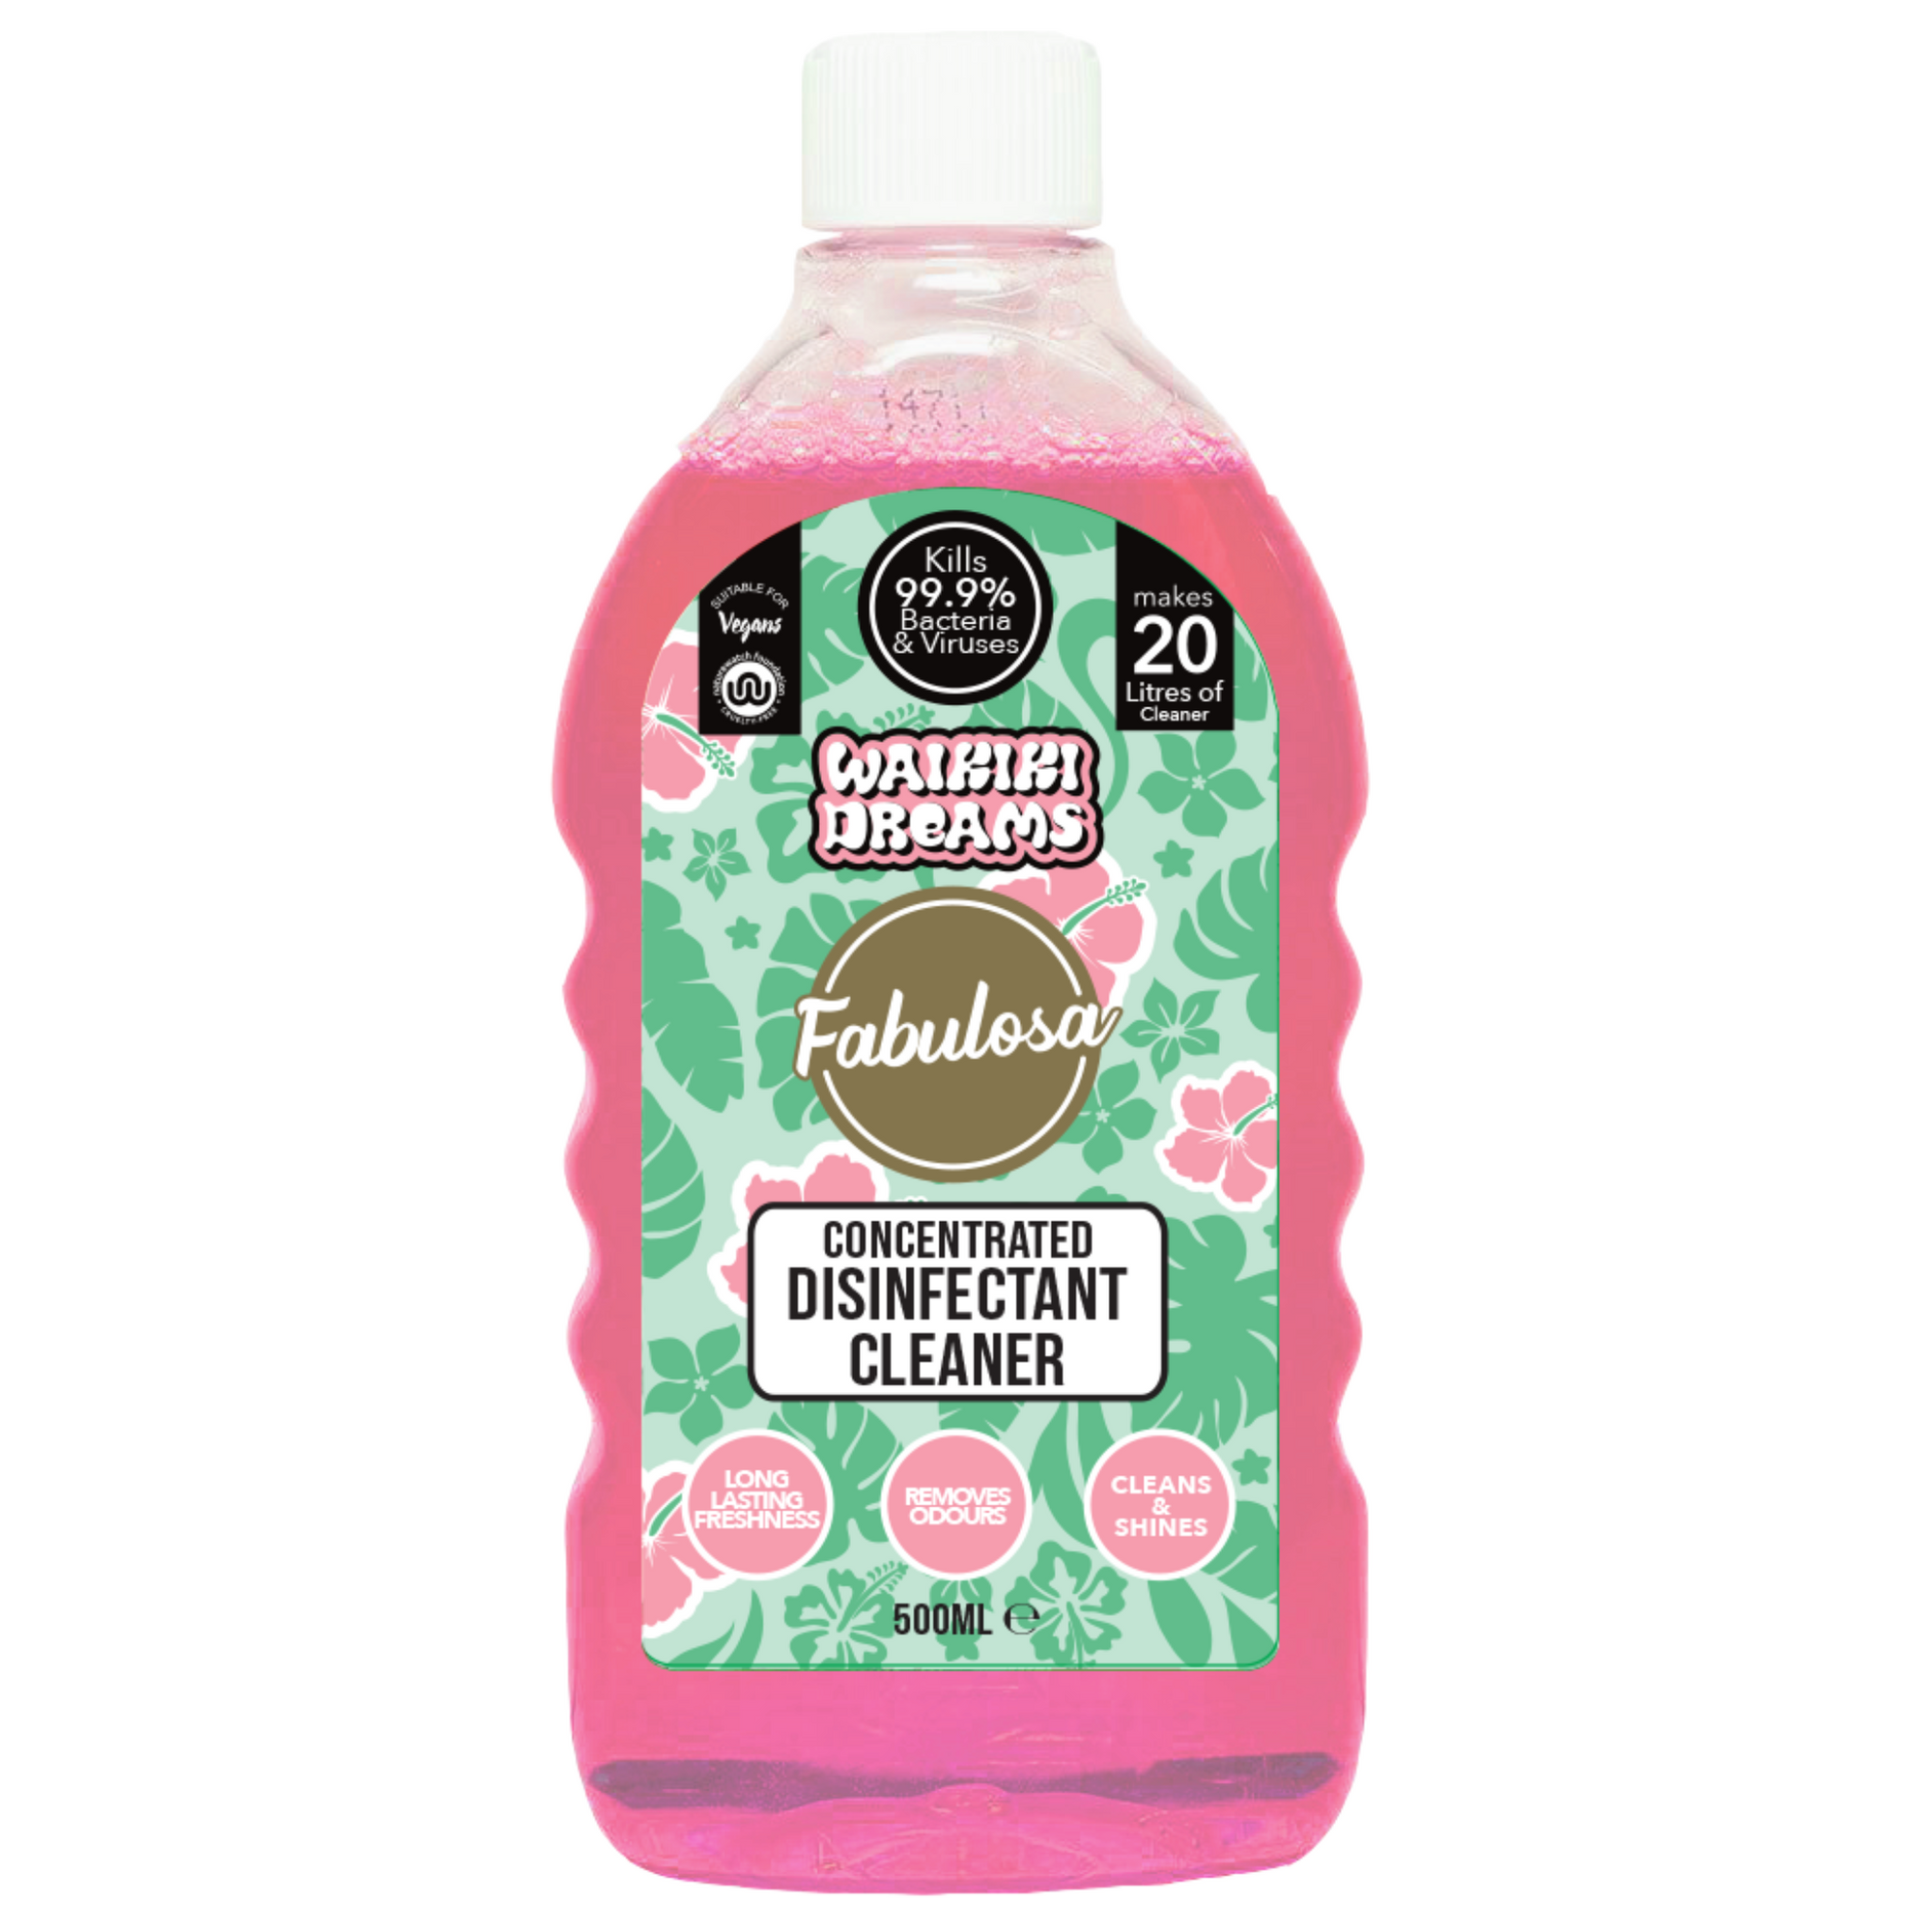 Fabulosa Concentrated Disinfectant - Waikiki Dreams (500ml)